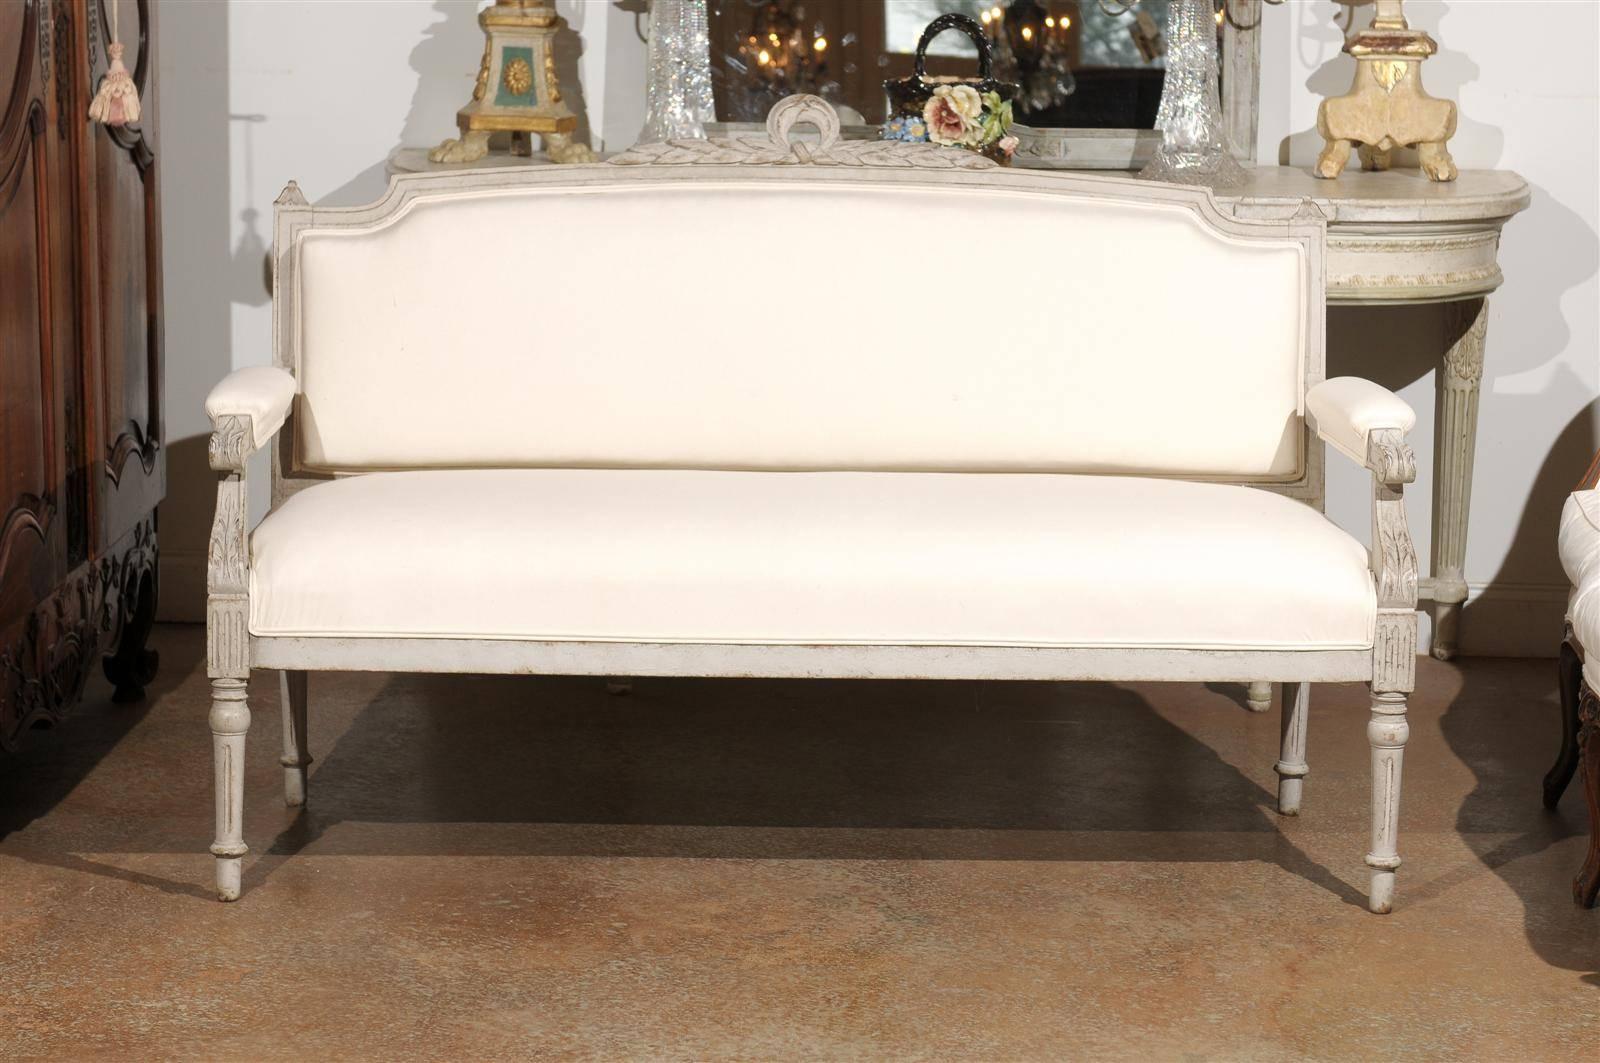 19th Century Swedish 1880s Neoclassical Style Painted Sofa with Carved Rail and Scrolled Arms